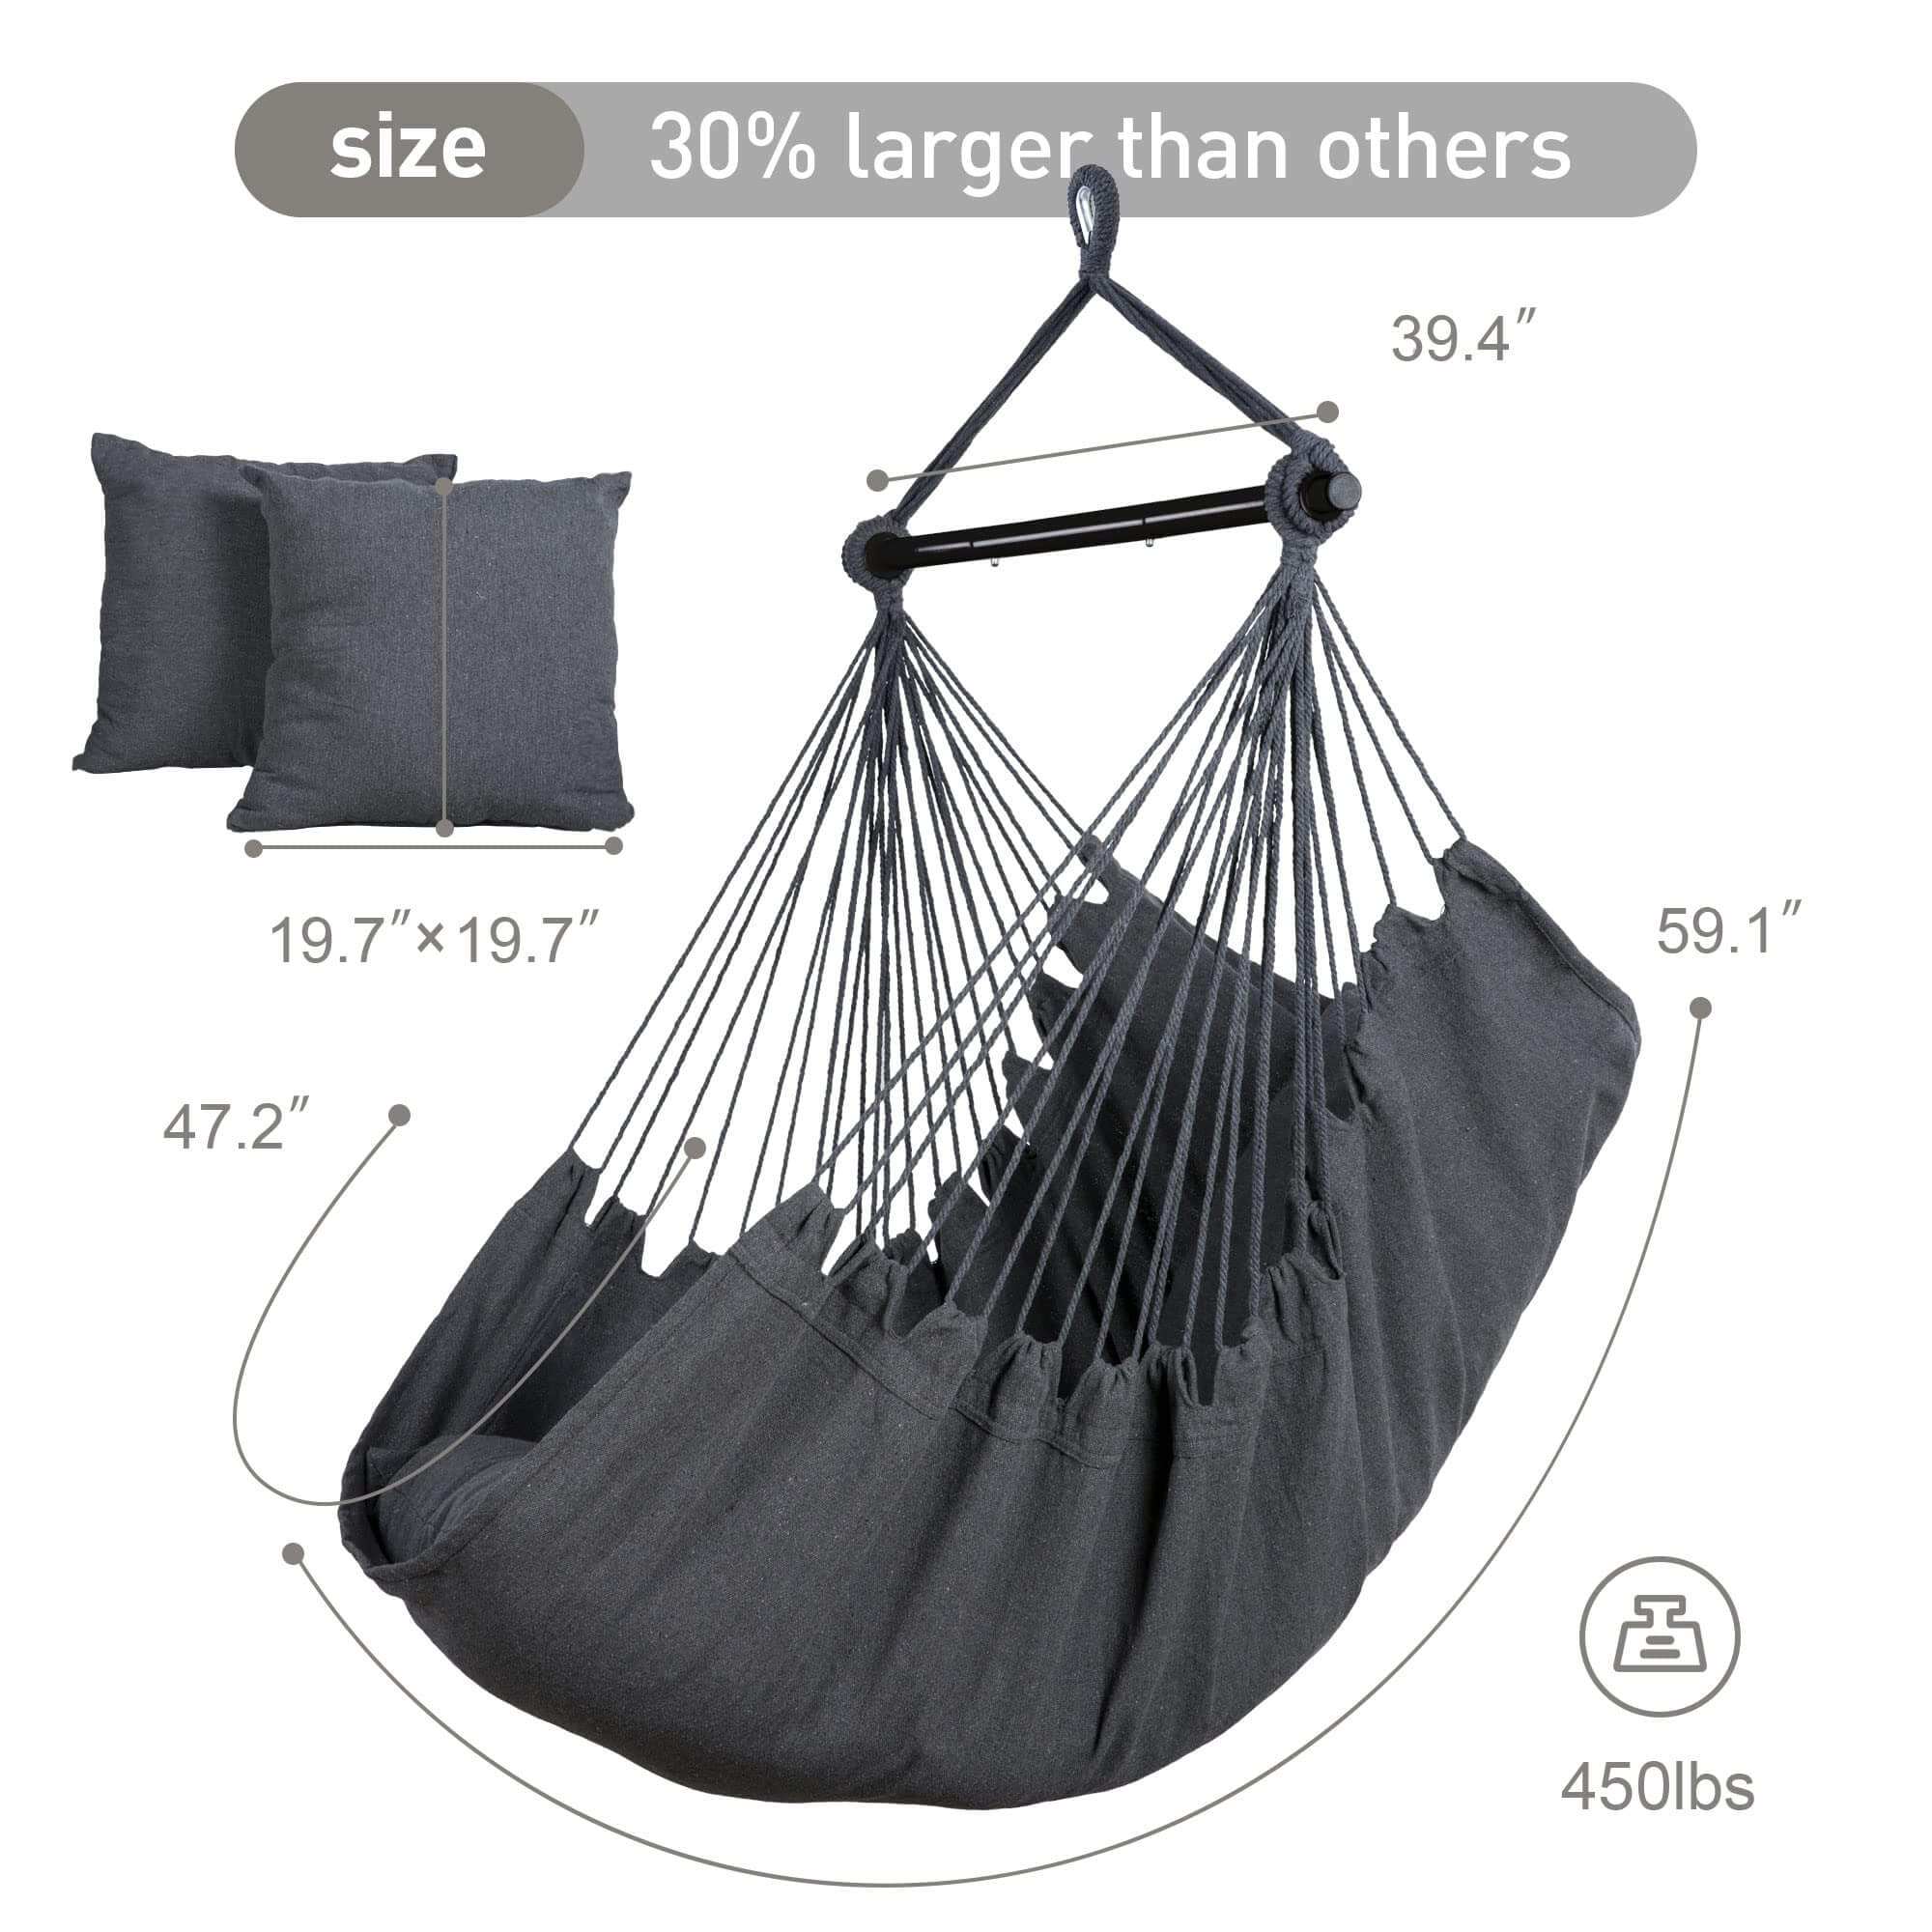 Hanging Rope Hammock Chair with Metal Support Bar and 2 Cushions |SUNCREAT